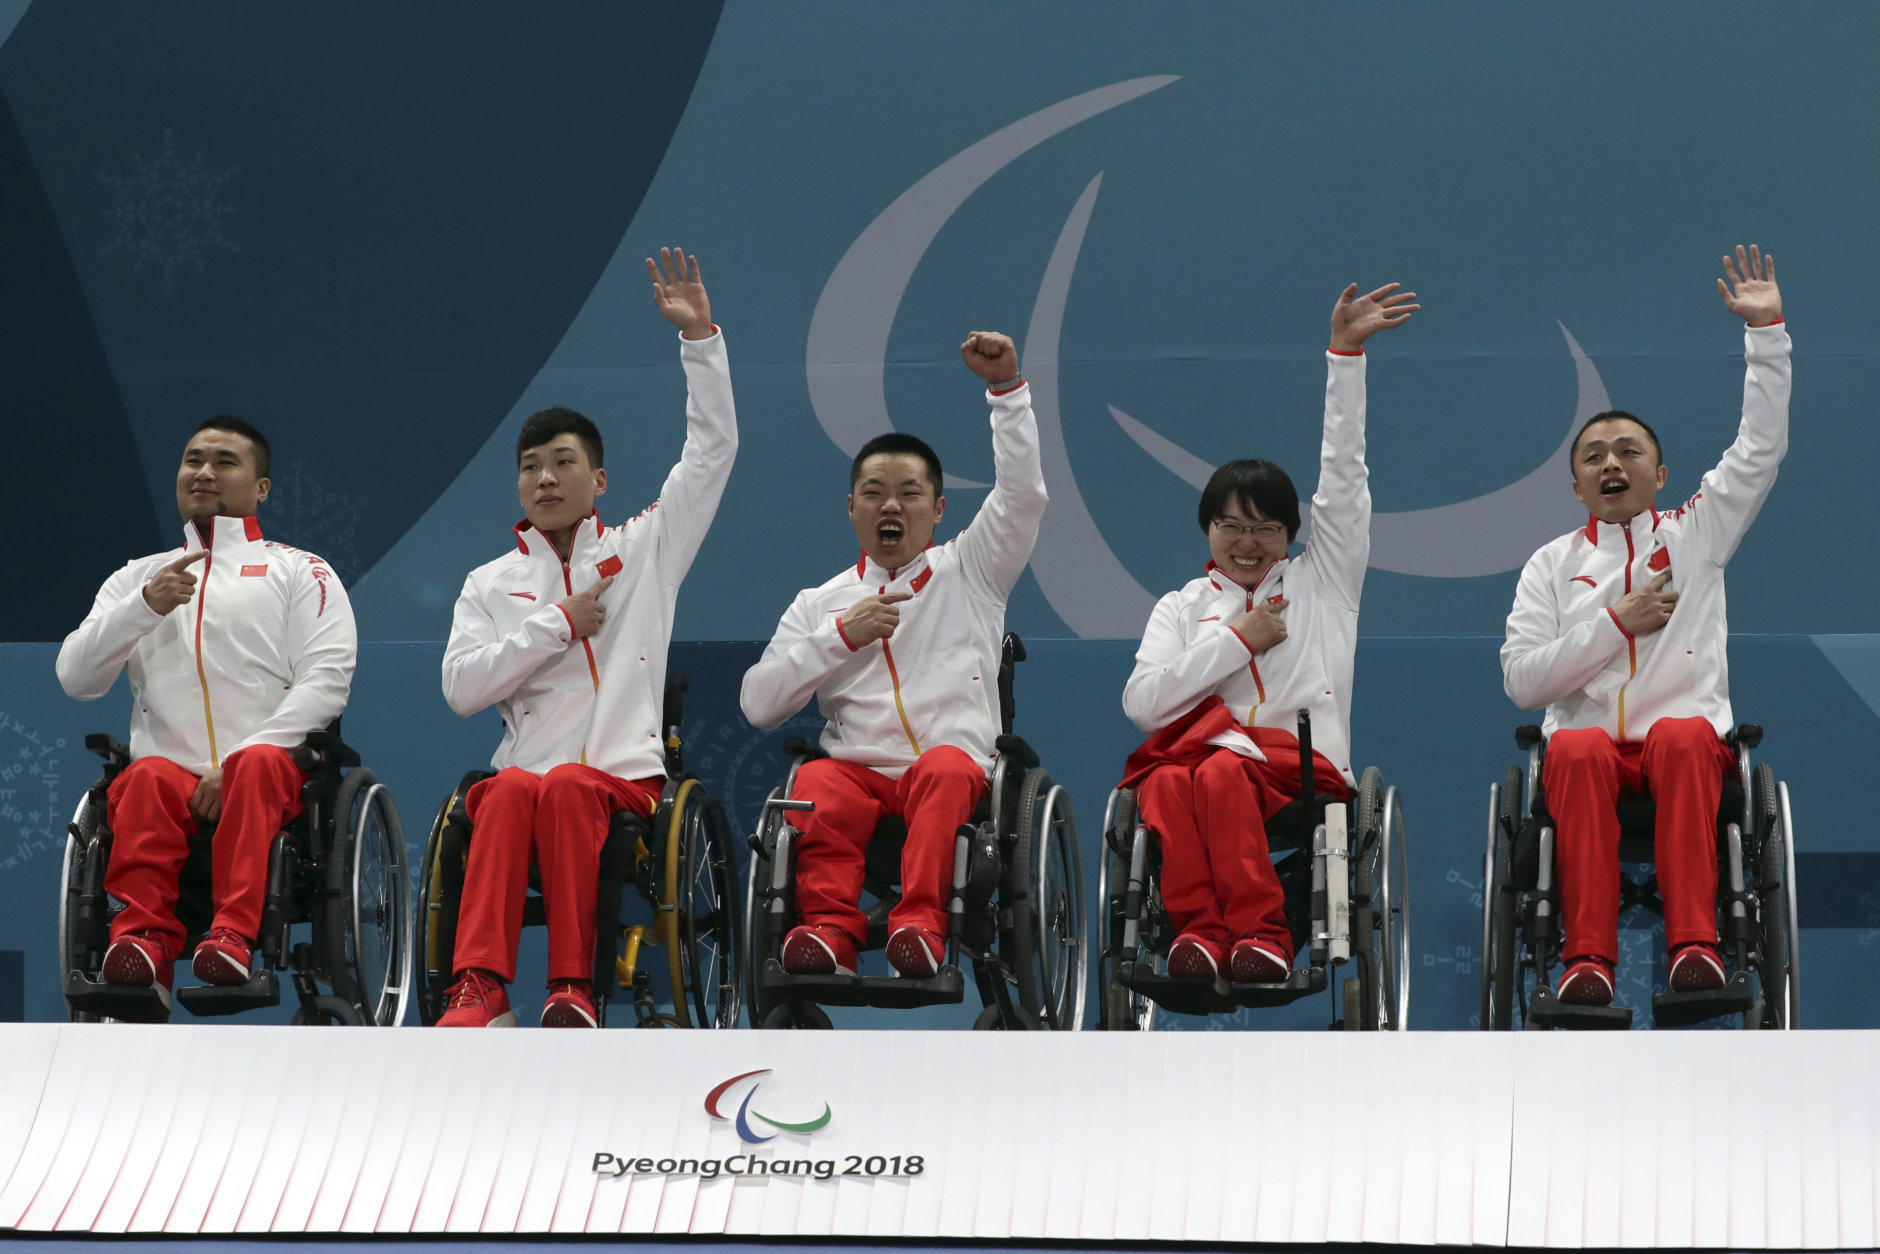 Members of China's wheelchair curling team from left Wang Haitao, Chen Jianxin, Liu Wei, Wang Meng and Zhang Qiang point to their national flag on their jacket as they celebrate on the podium after defeating Norway in the Wheelchair Curling gold medal match for the 2018 Winter Paralympics at the Gangneung Curling Centre in Gangneung, South Korea, Saturday, March 17, 2018.(AP Photo/Ng Han Guan)